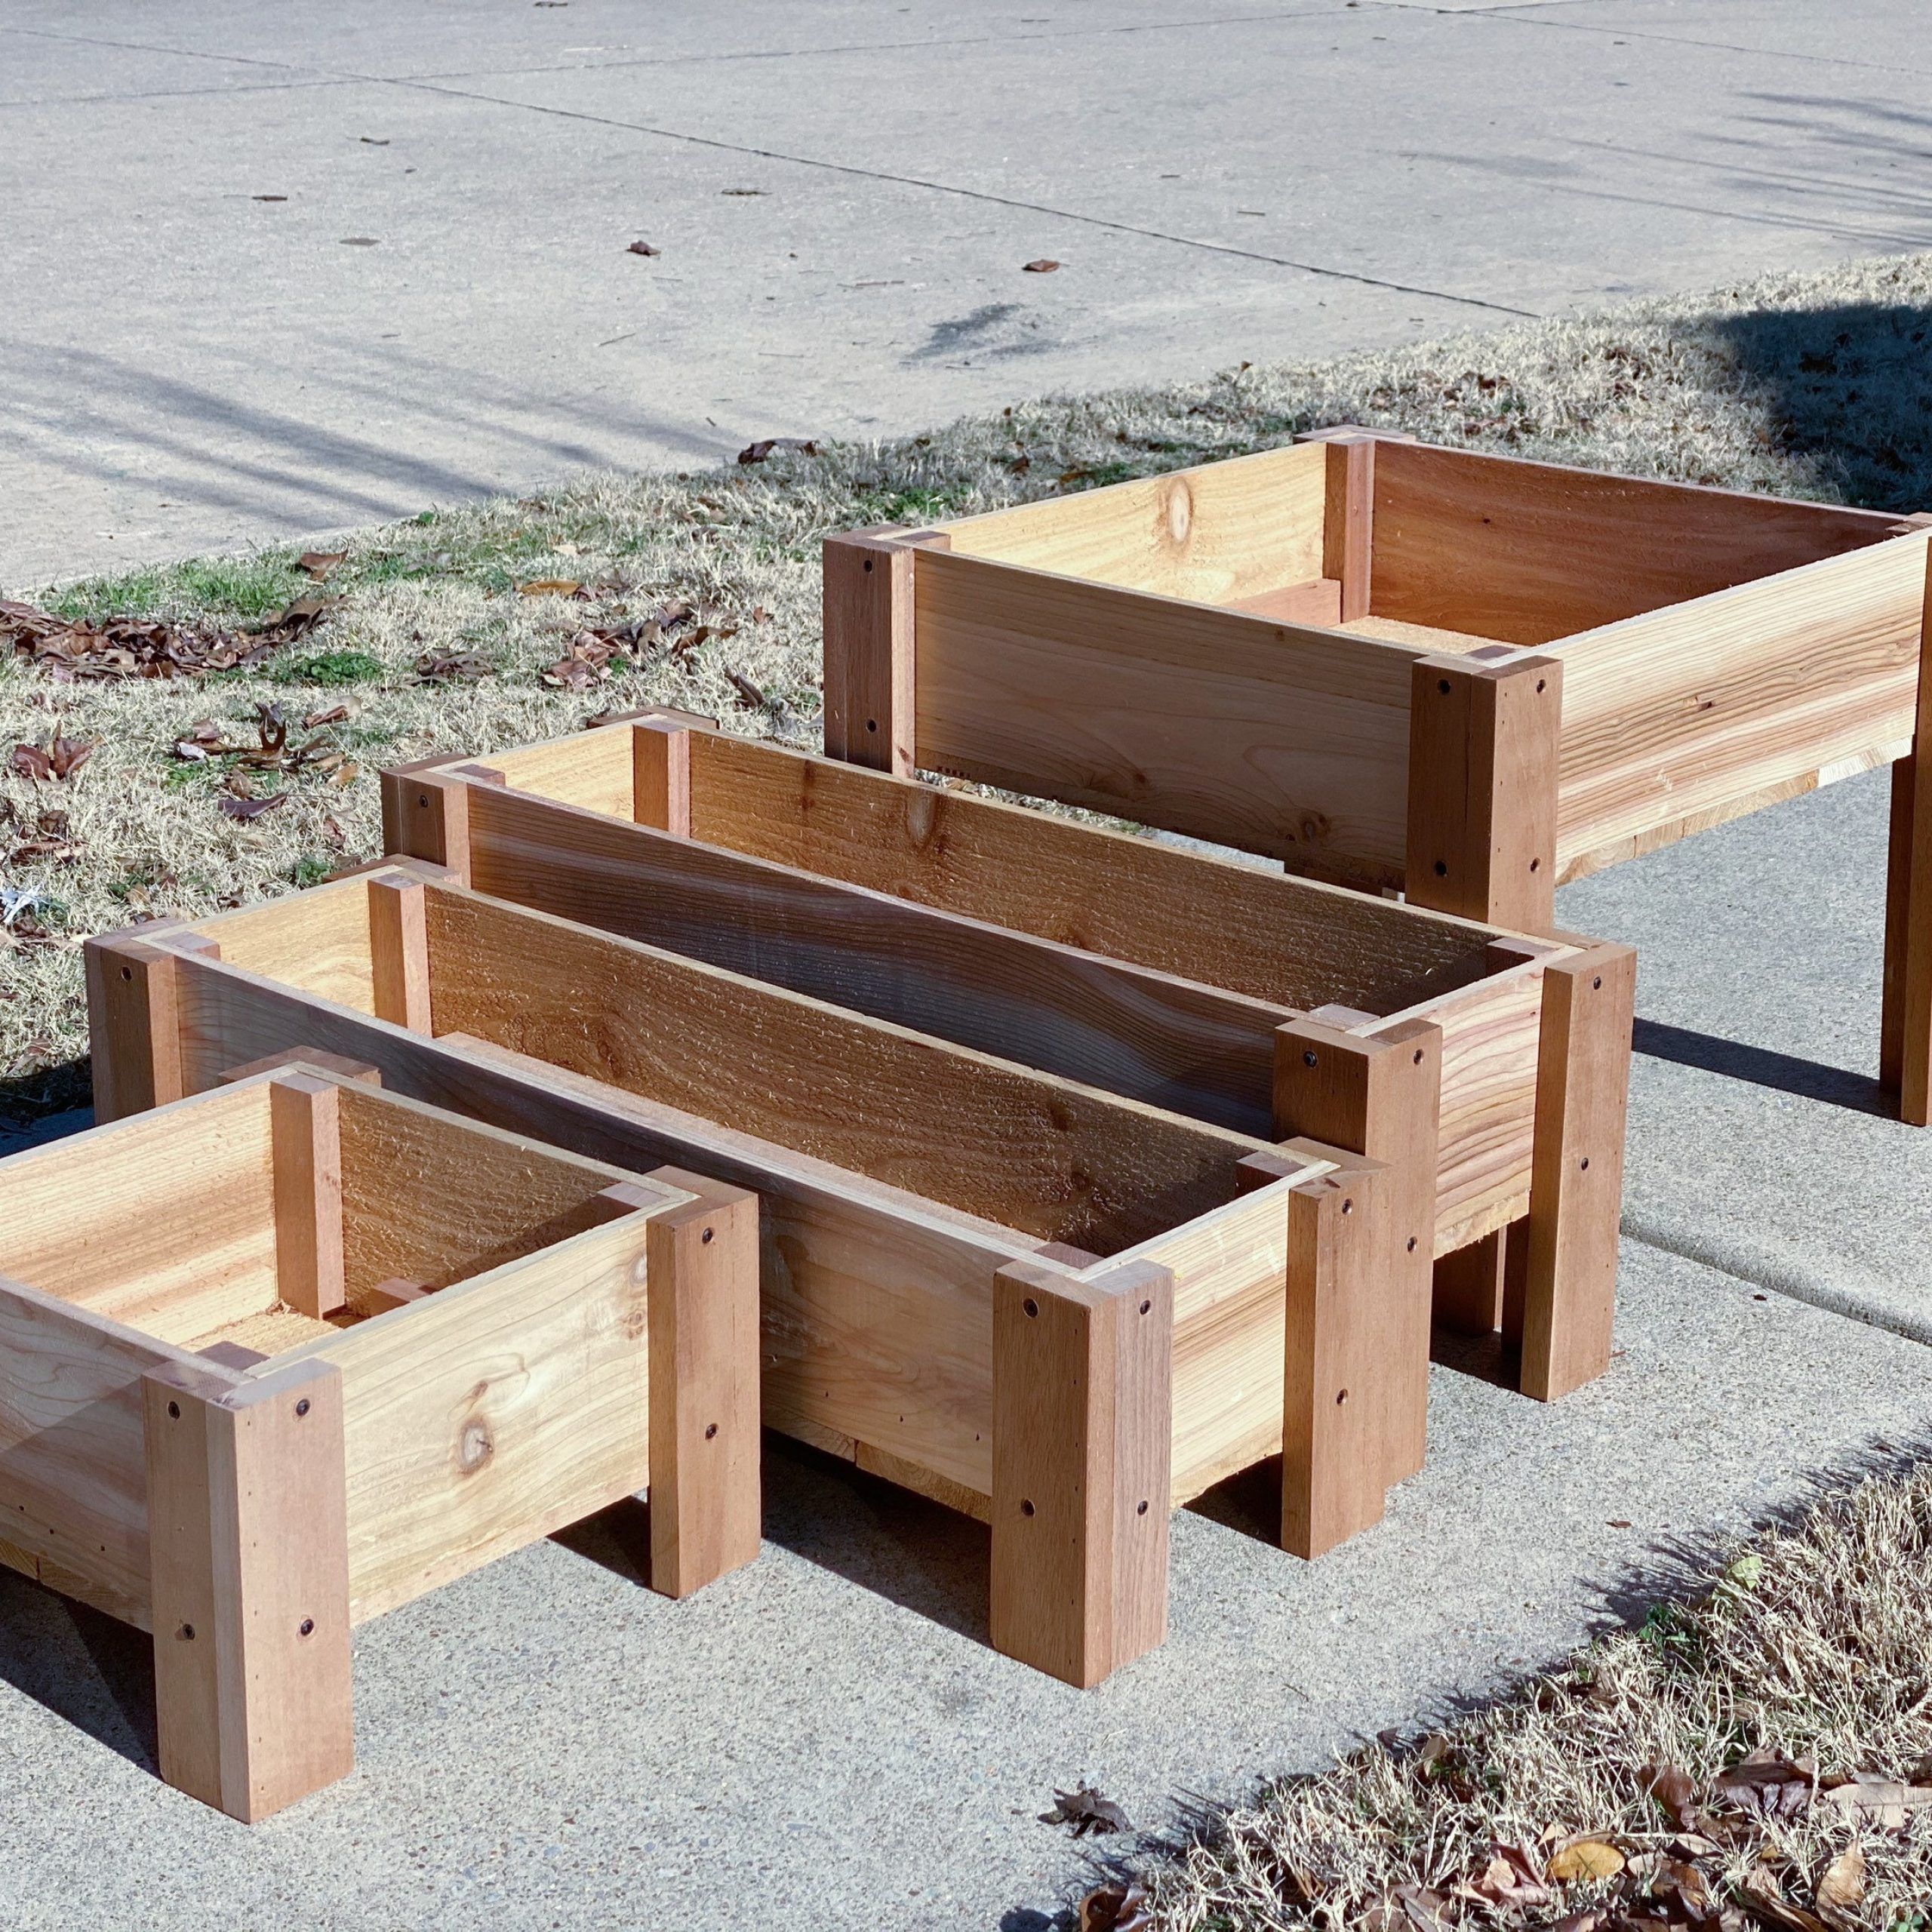 Set Of 4 Raised Cedar Garden Boxes Handmade Raised Cedar – Etsy Pertaining To Plant Stands With Flower Box (View 12 of 15)